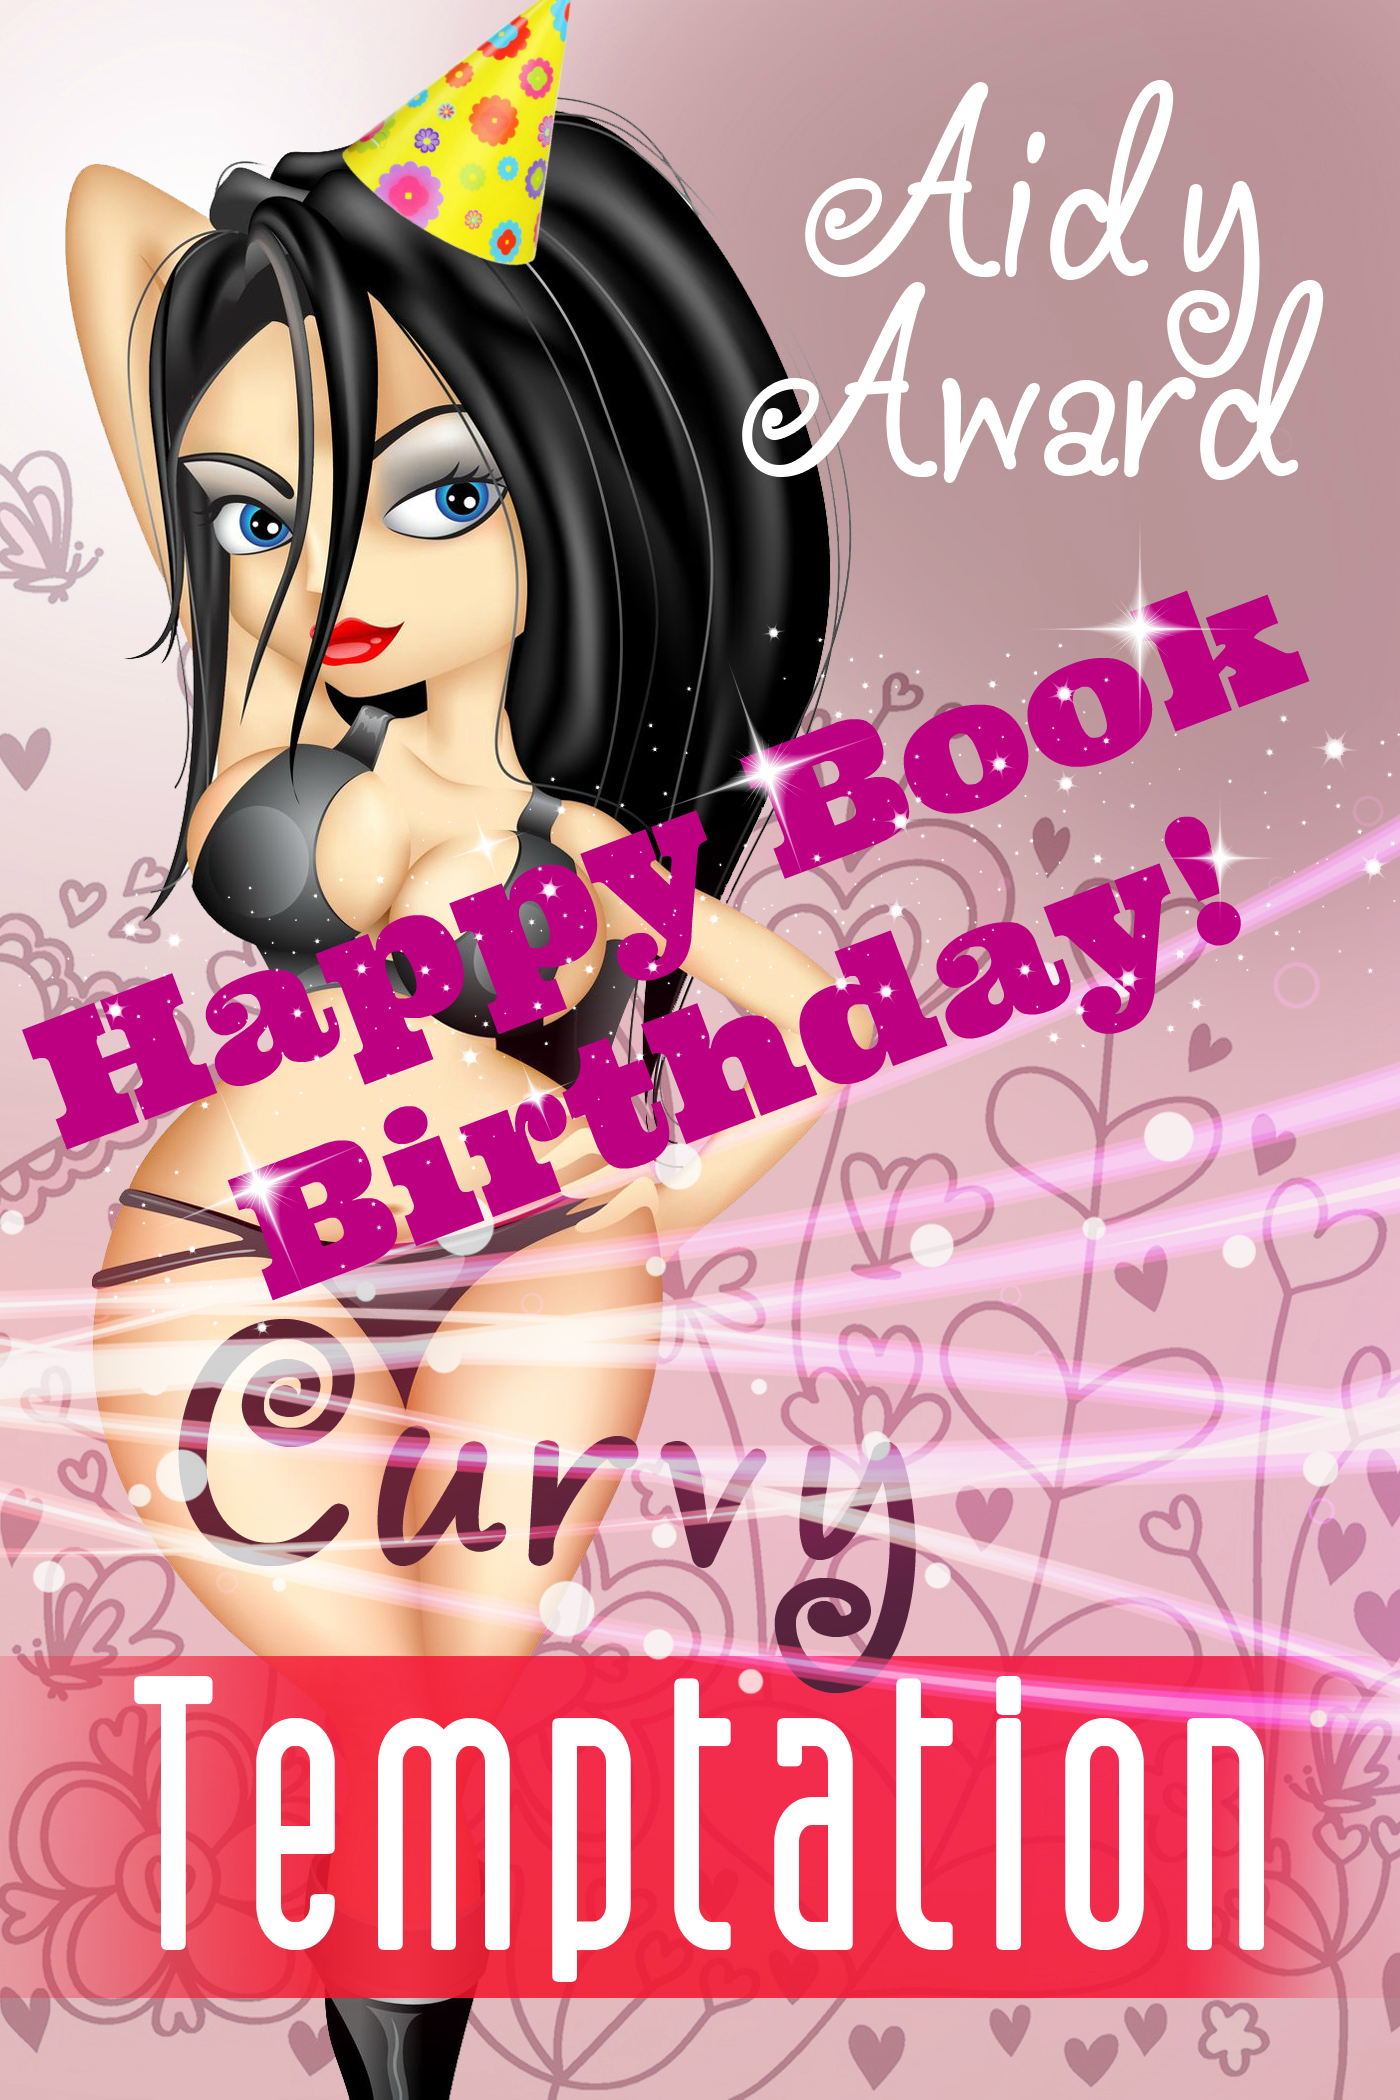 The Curvy Temptation book cover has sparkles and stars all over it and a big banner that says Happy Book Birthday is slapped across it. Also, the Vanessa character is wearing a party hat.